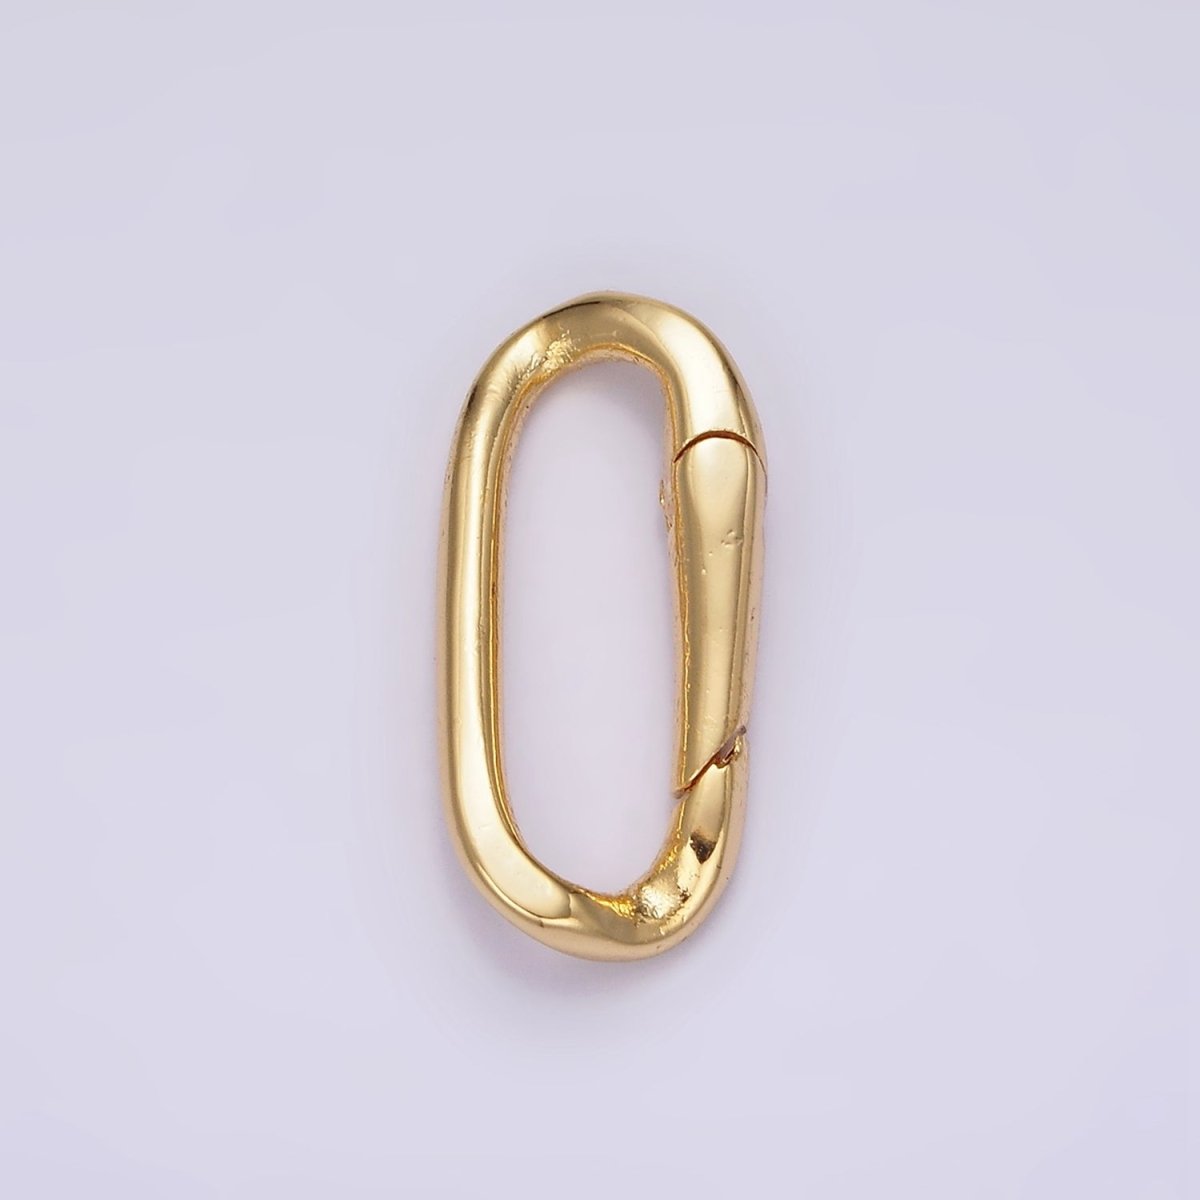 OS 24K Gold Filled 21mm Edged Paperclip Oblong Push Spring Gate Minimalist Findings Supply | Z574 - DLUXCA